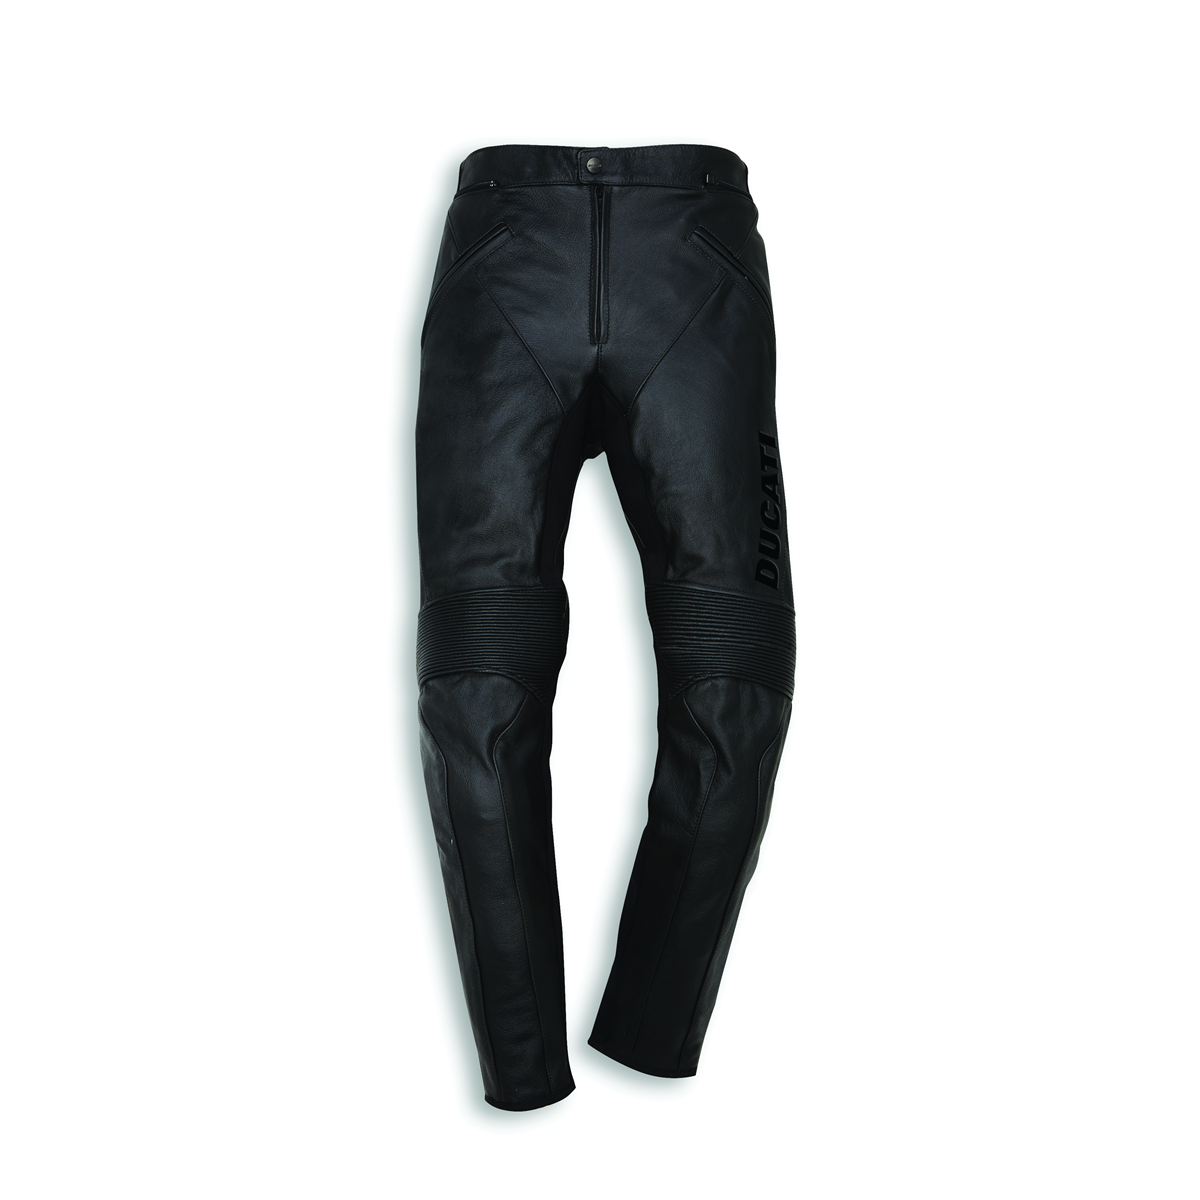 Women's Motorcycle Pants - Fraser Motorcycles